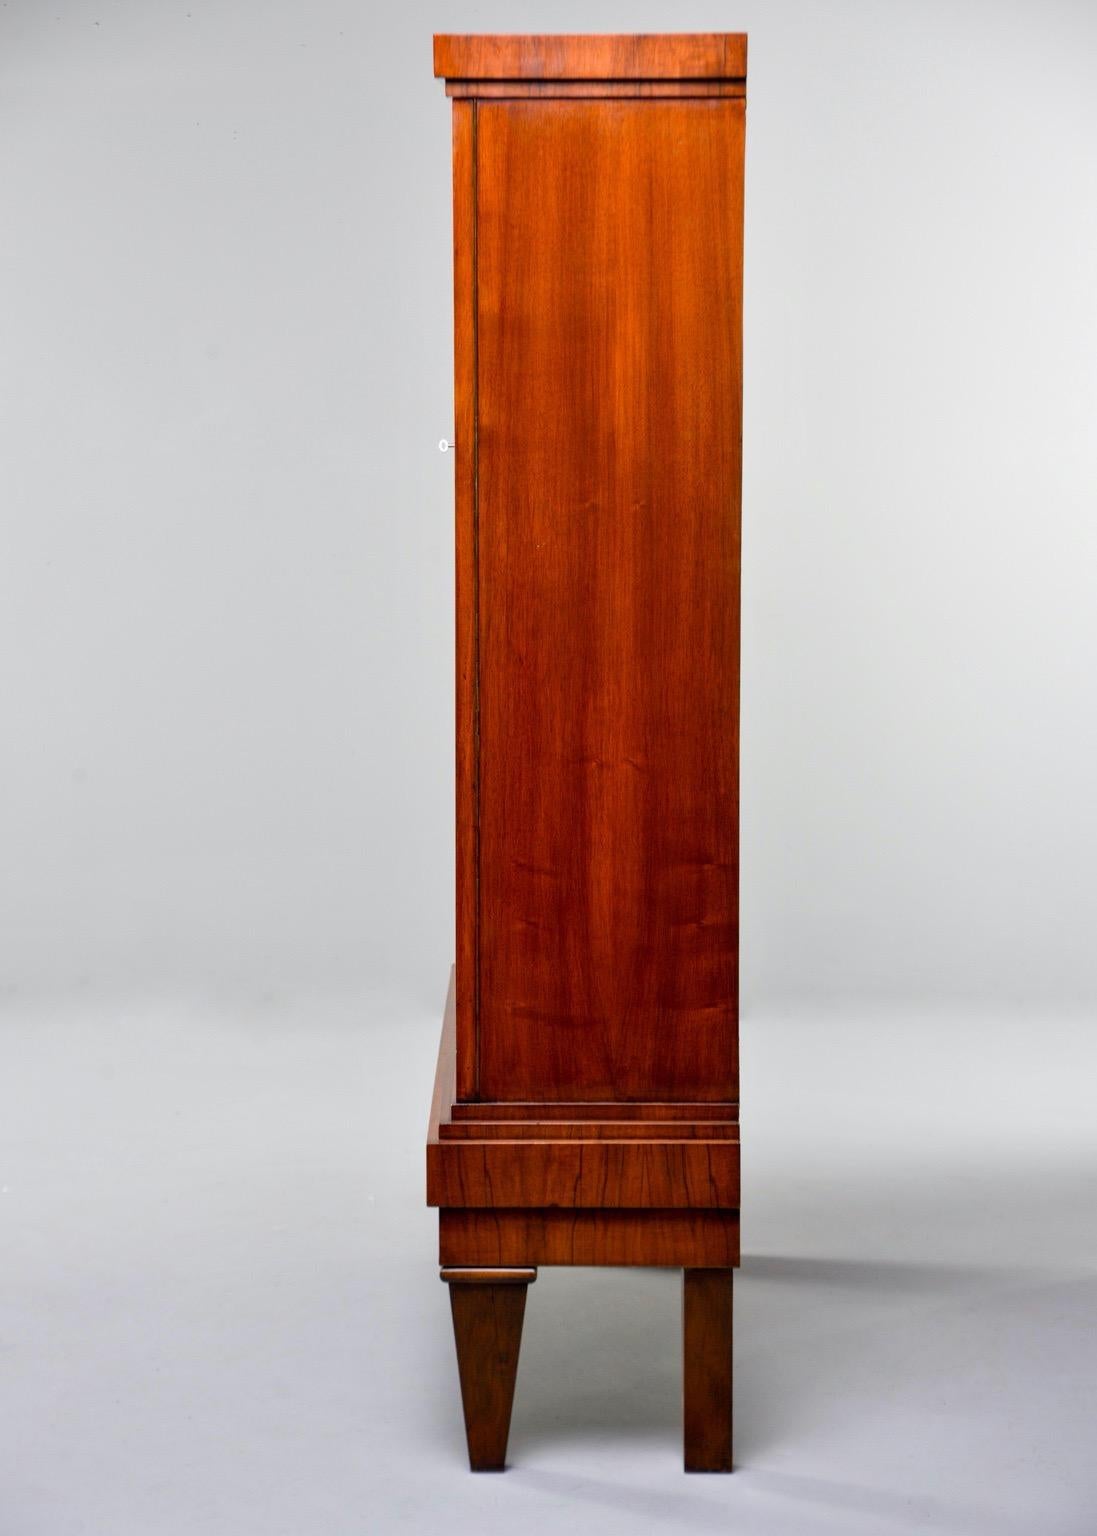 French Art Deco Tall Mahogany Cabinet with Glass Doors 1